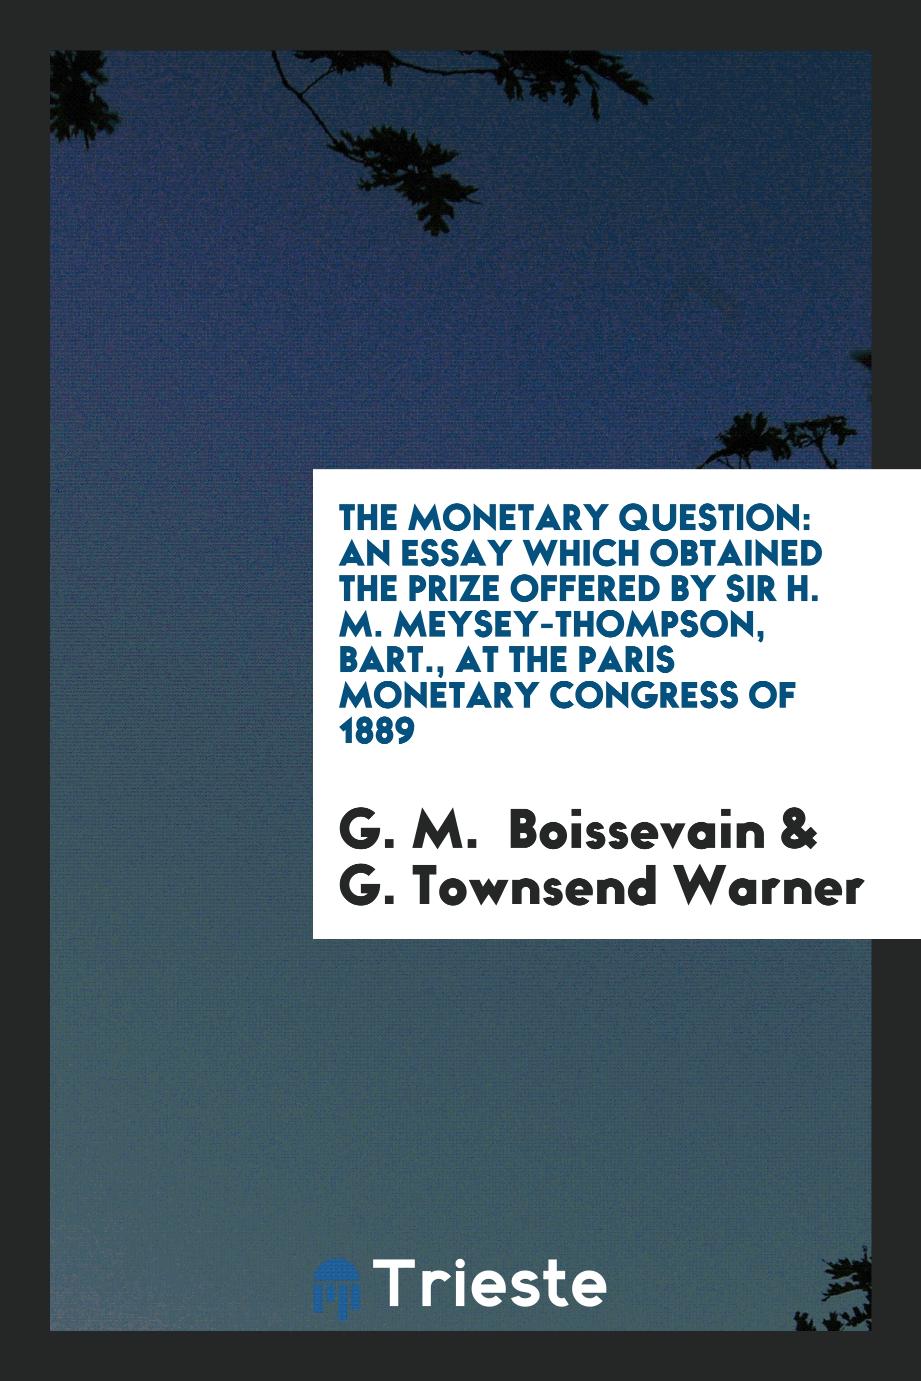 The Monetary Question: An Essay which Obtained the Prize Offered by Sir H. M. Meysey-Thompson, Bart., at the Paris Monetary Congress of 1889